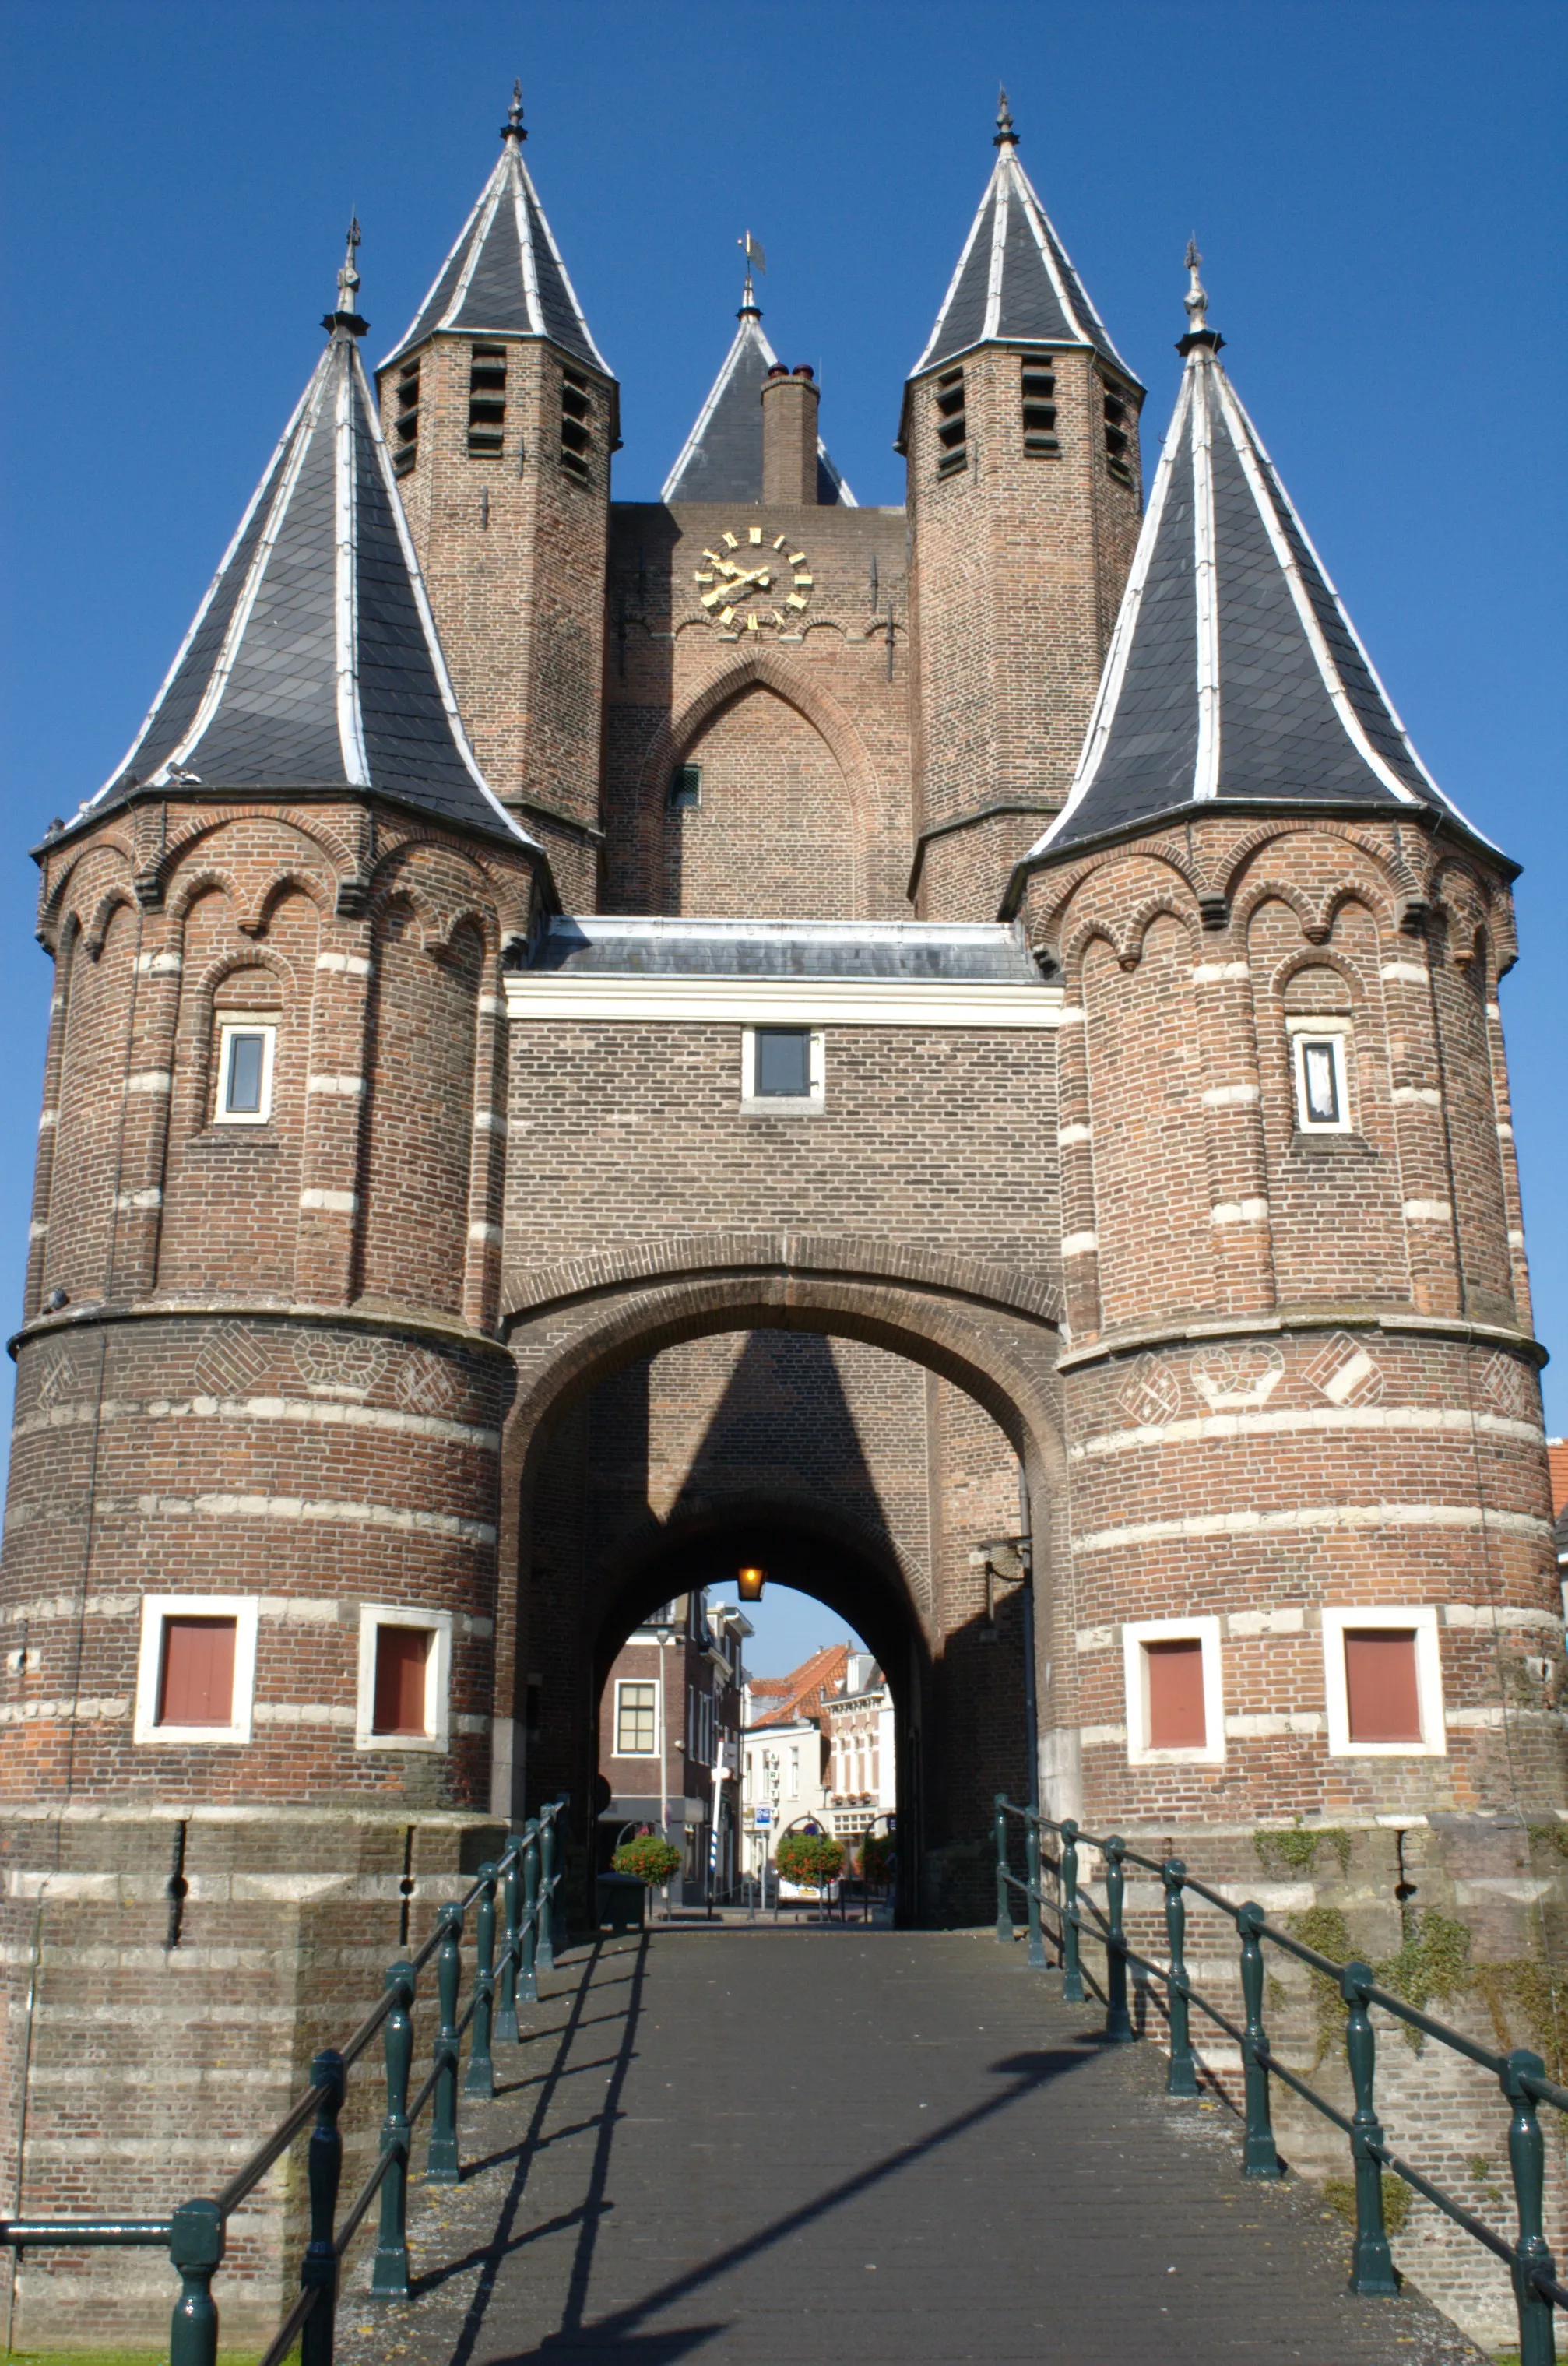 Photo showing: The Spaarnwouder- or Amsterdamse poort is the only gate of Haarlem that is still standing. It's now a landmark next to the road from Haarlem to Amsterdam.